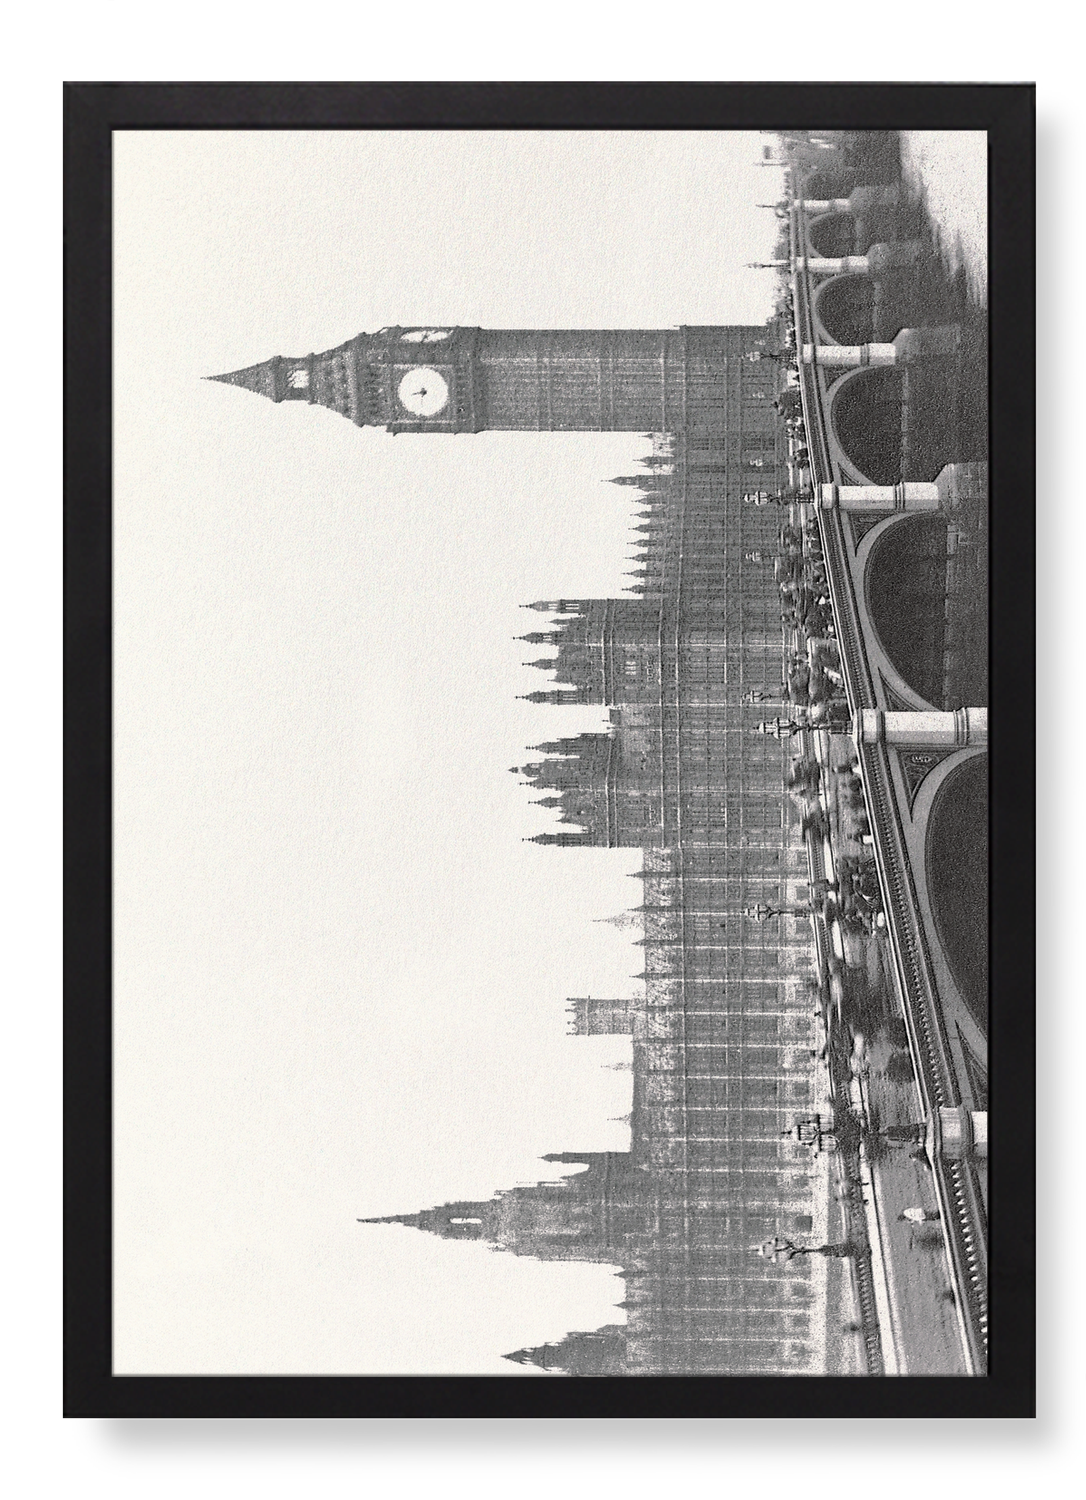 HOUSES OF PARLIAMENT (1867-1870)